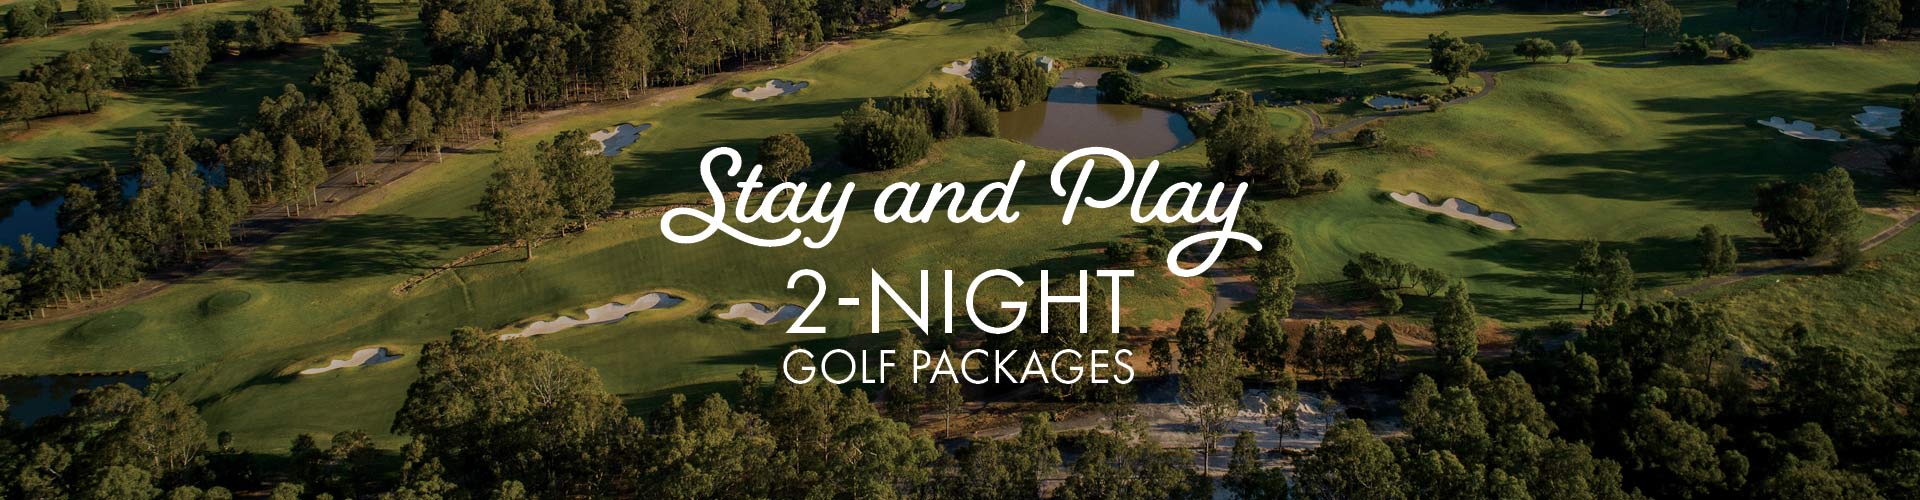 Oaks Cypress Stay and Play Golfing Getaway Packages LP